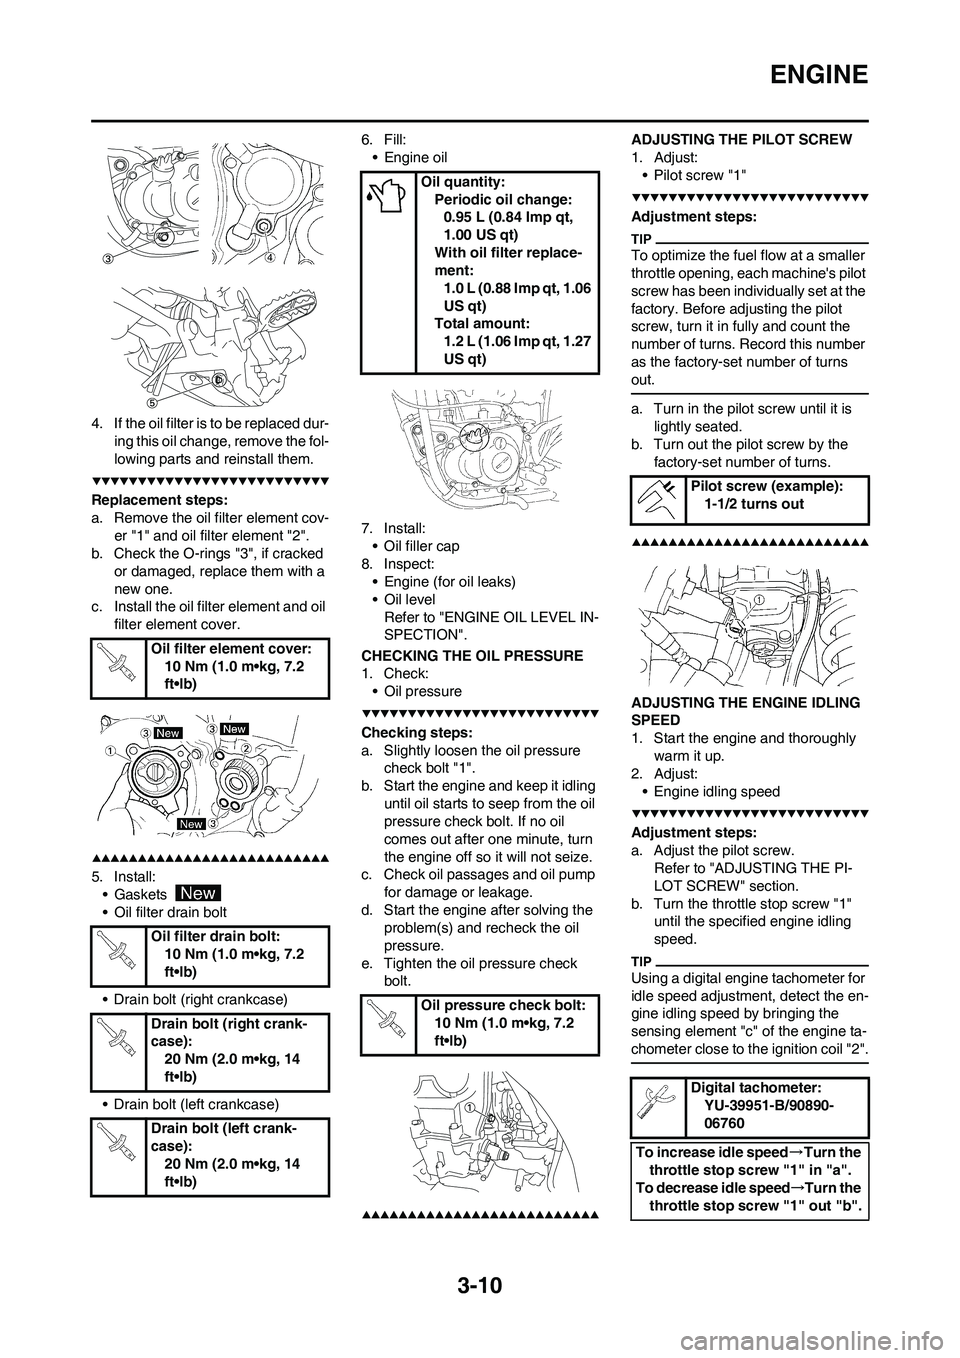 YAMAHA YZ450F 2009  Owners Manual 3-10
ENGINE
4. If the oil filter is to be replaced dur-
ing this oil change, remove the fol-
lowing parts and reinstall them.
Replacement steps:
a. Remove the oil filter element cov-
er "1" and oil fi